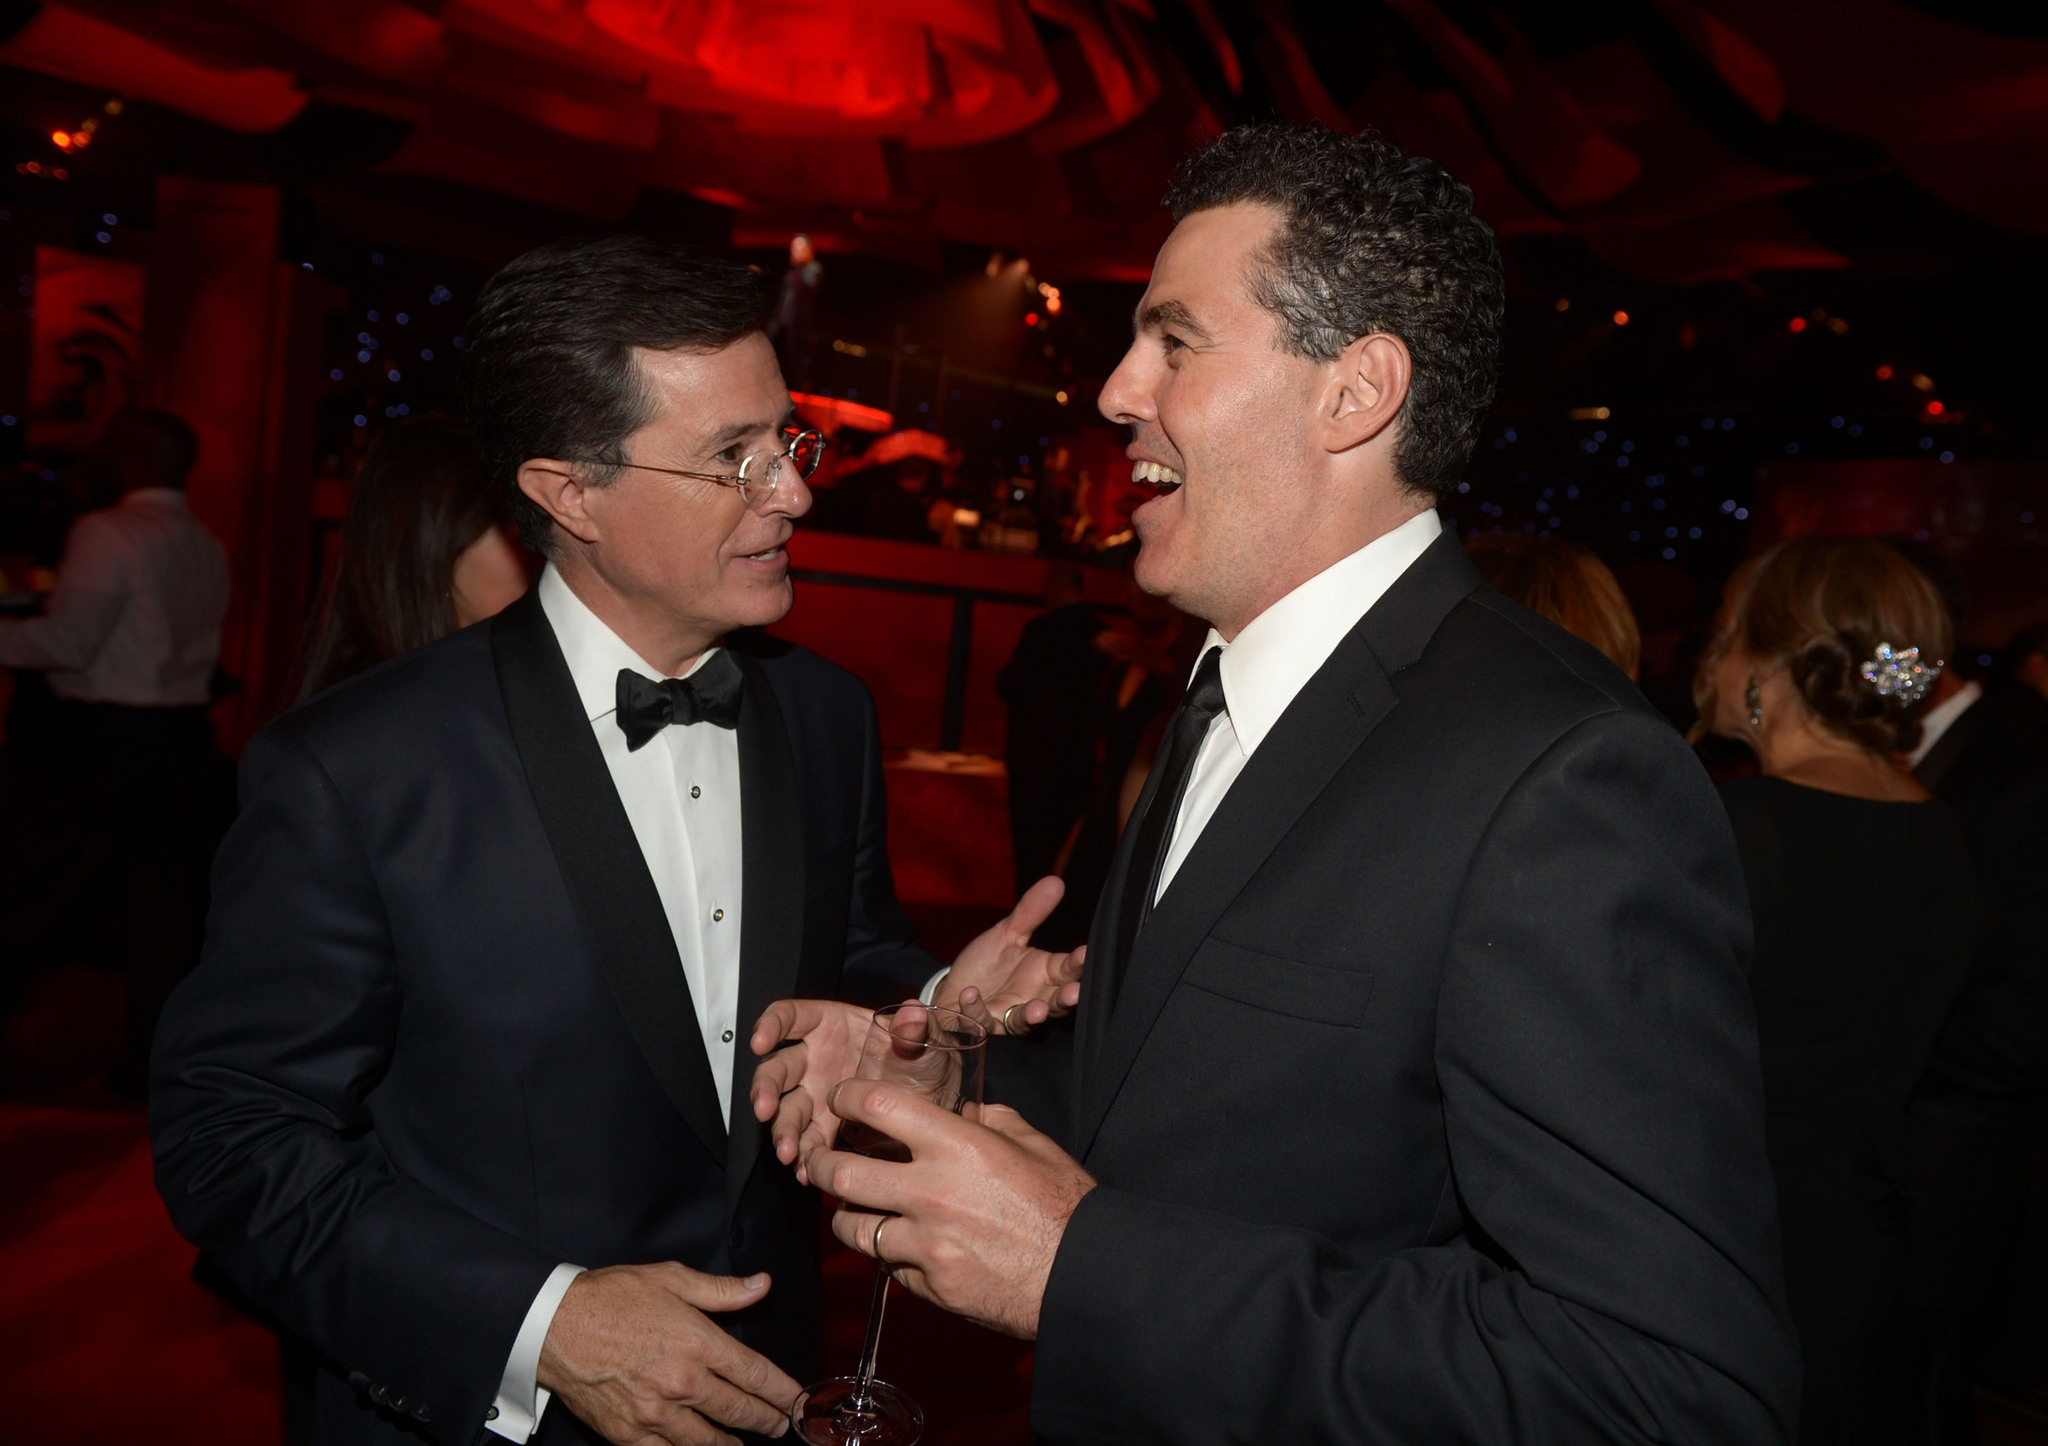 Adam Carolla and Stephen Colbert at event of The 64th Primetime Emmy Awards (2012)